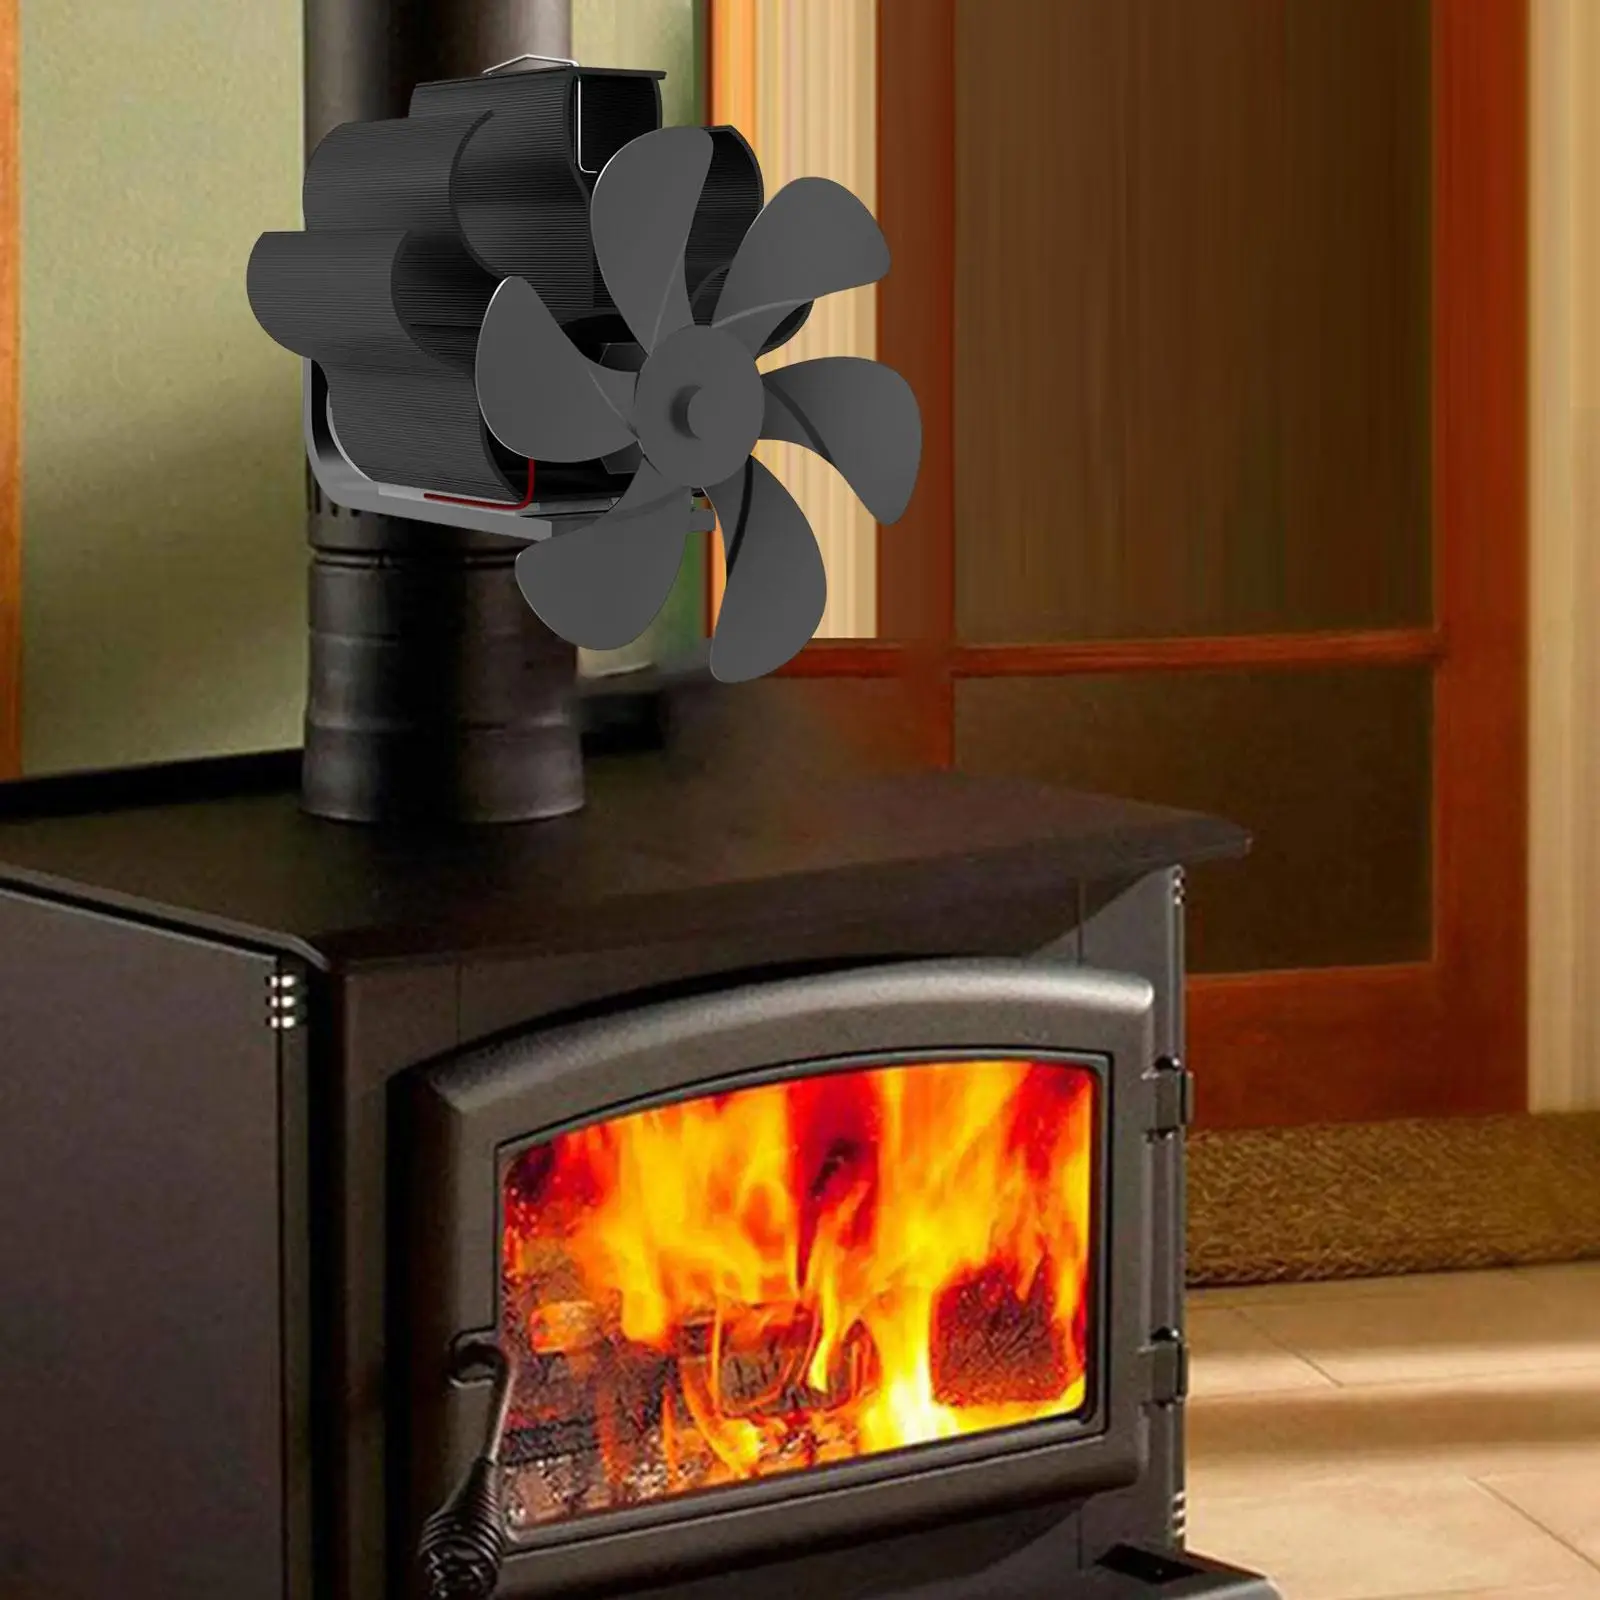 Chimney Pipe Wood Burner Fireplace Stove Fan Working Temperature 60-350°C Sturdy Energy Saving Low Noise Logs Burning Stove Fan